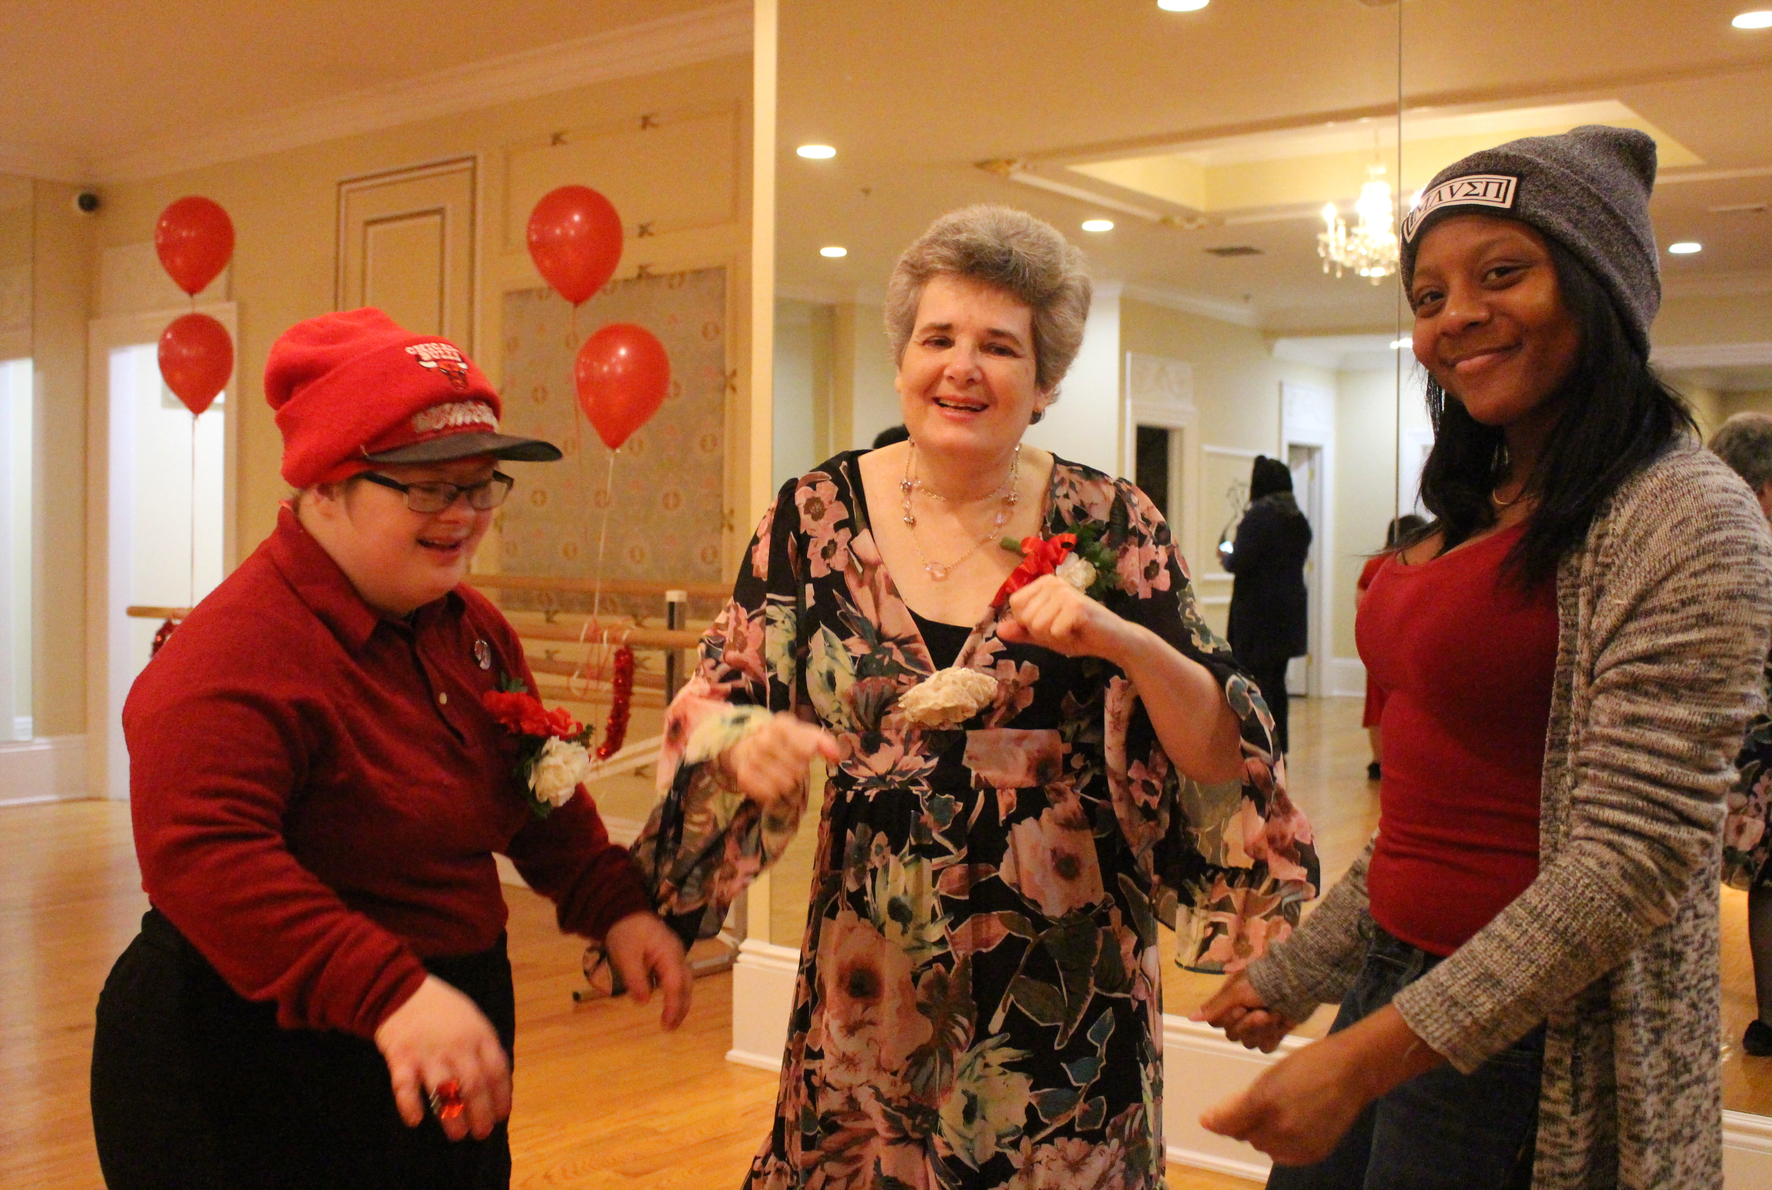 Christine Georgopulo hosted the third annual Sweetheart Dance for the Abilis community. Feb 18, 2017 Photo: Leslie Yager